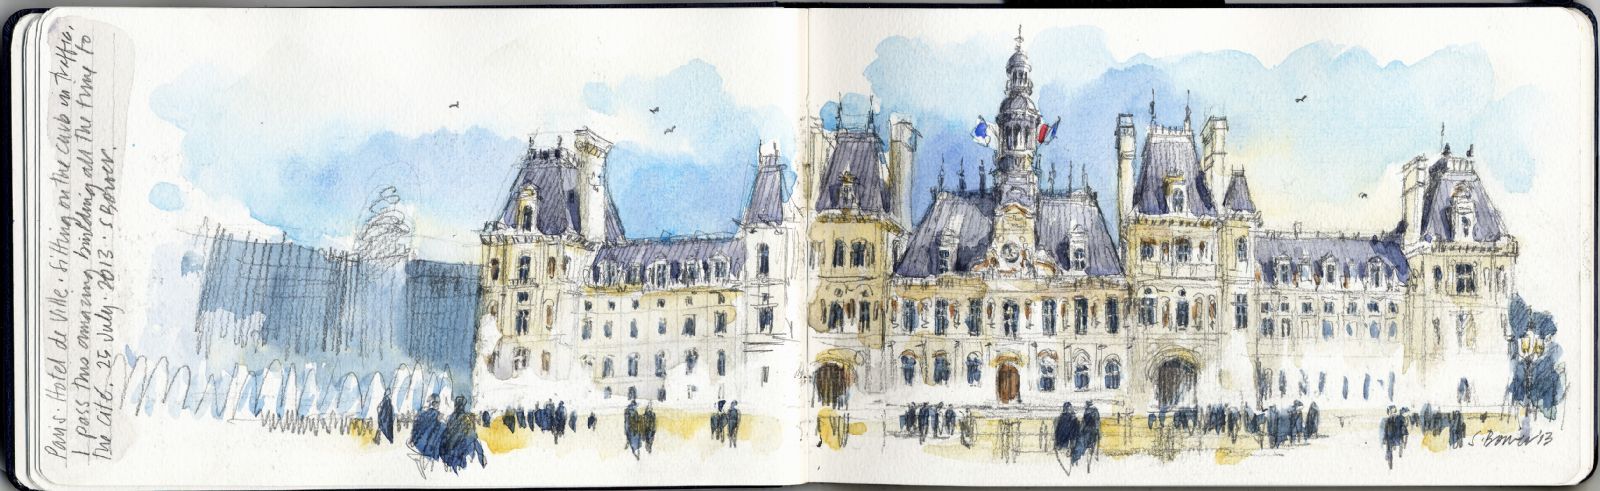 Best in Category - Professional Travel Sketch. © Stephanie Bower